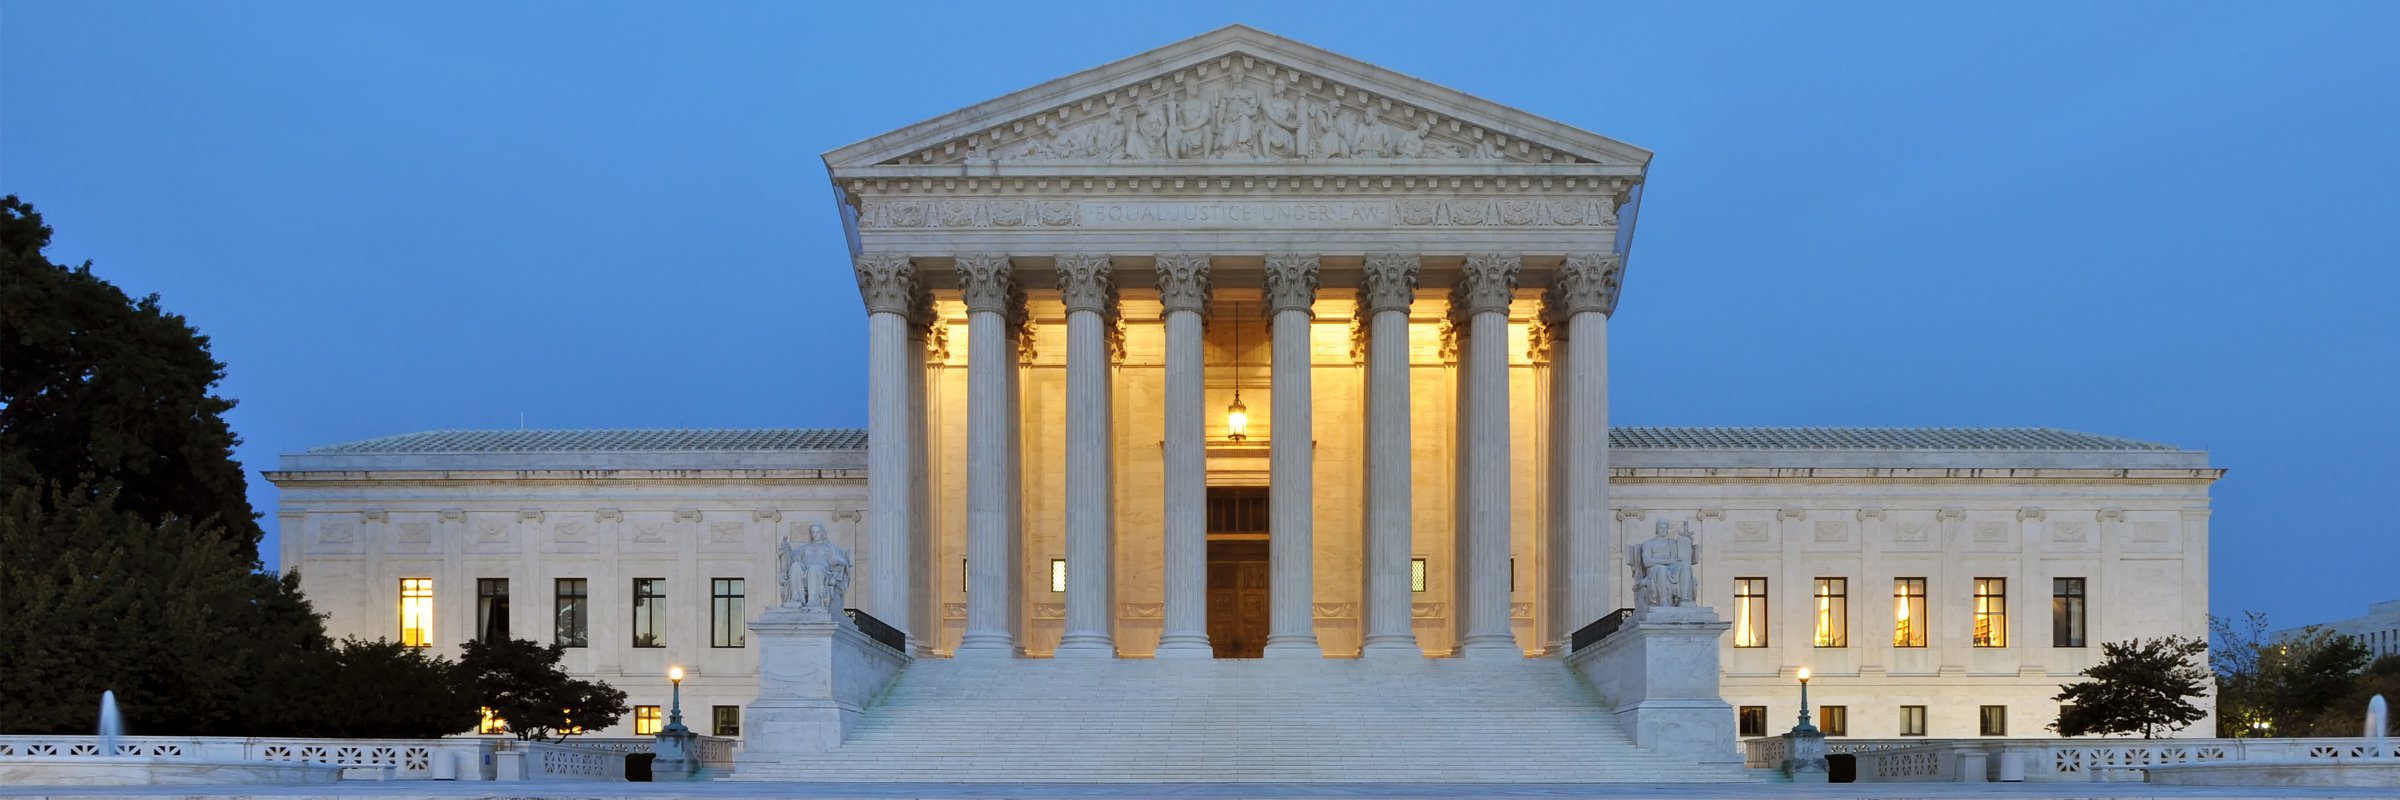 A picture of the Supreme Court building at dawn